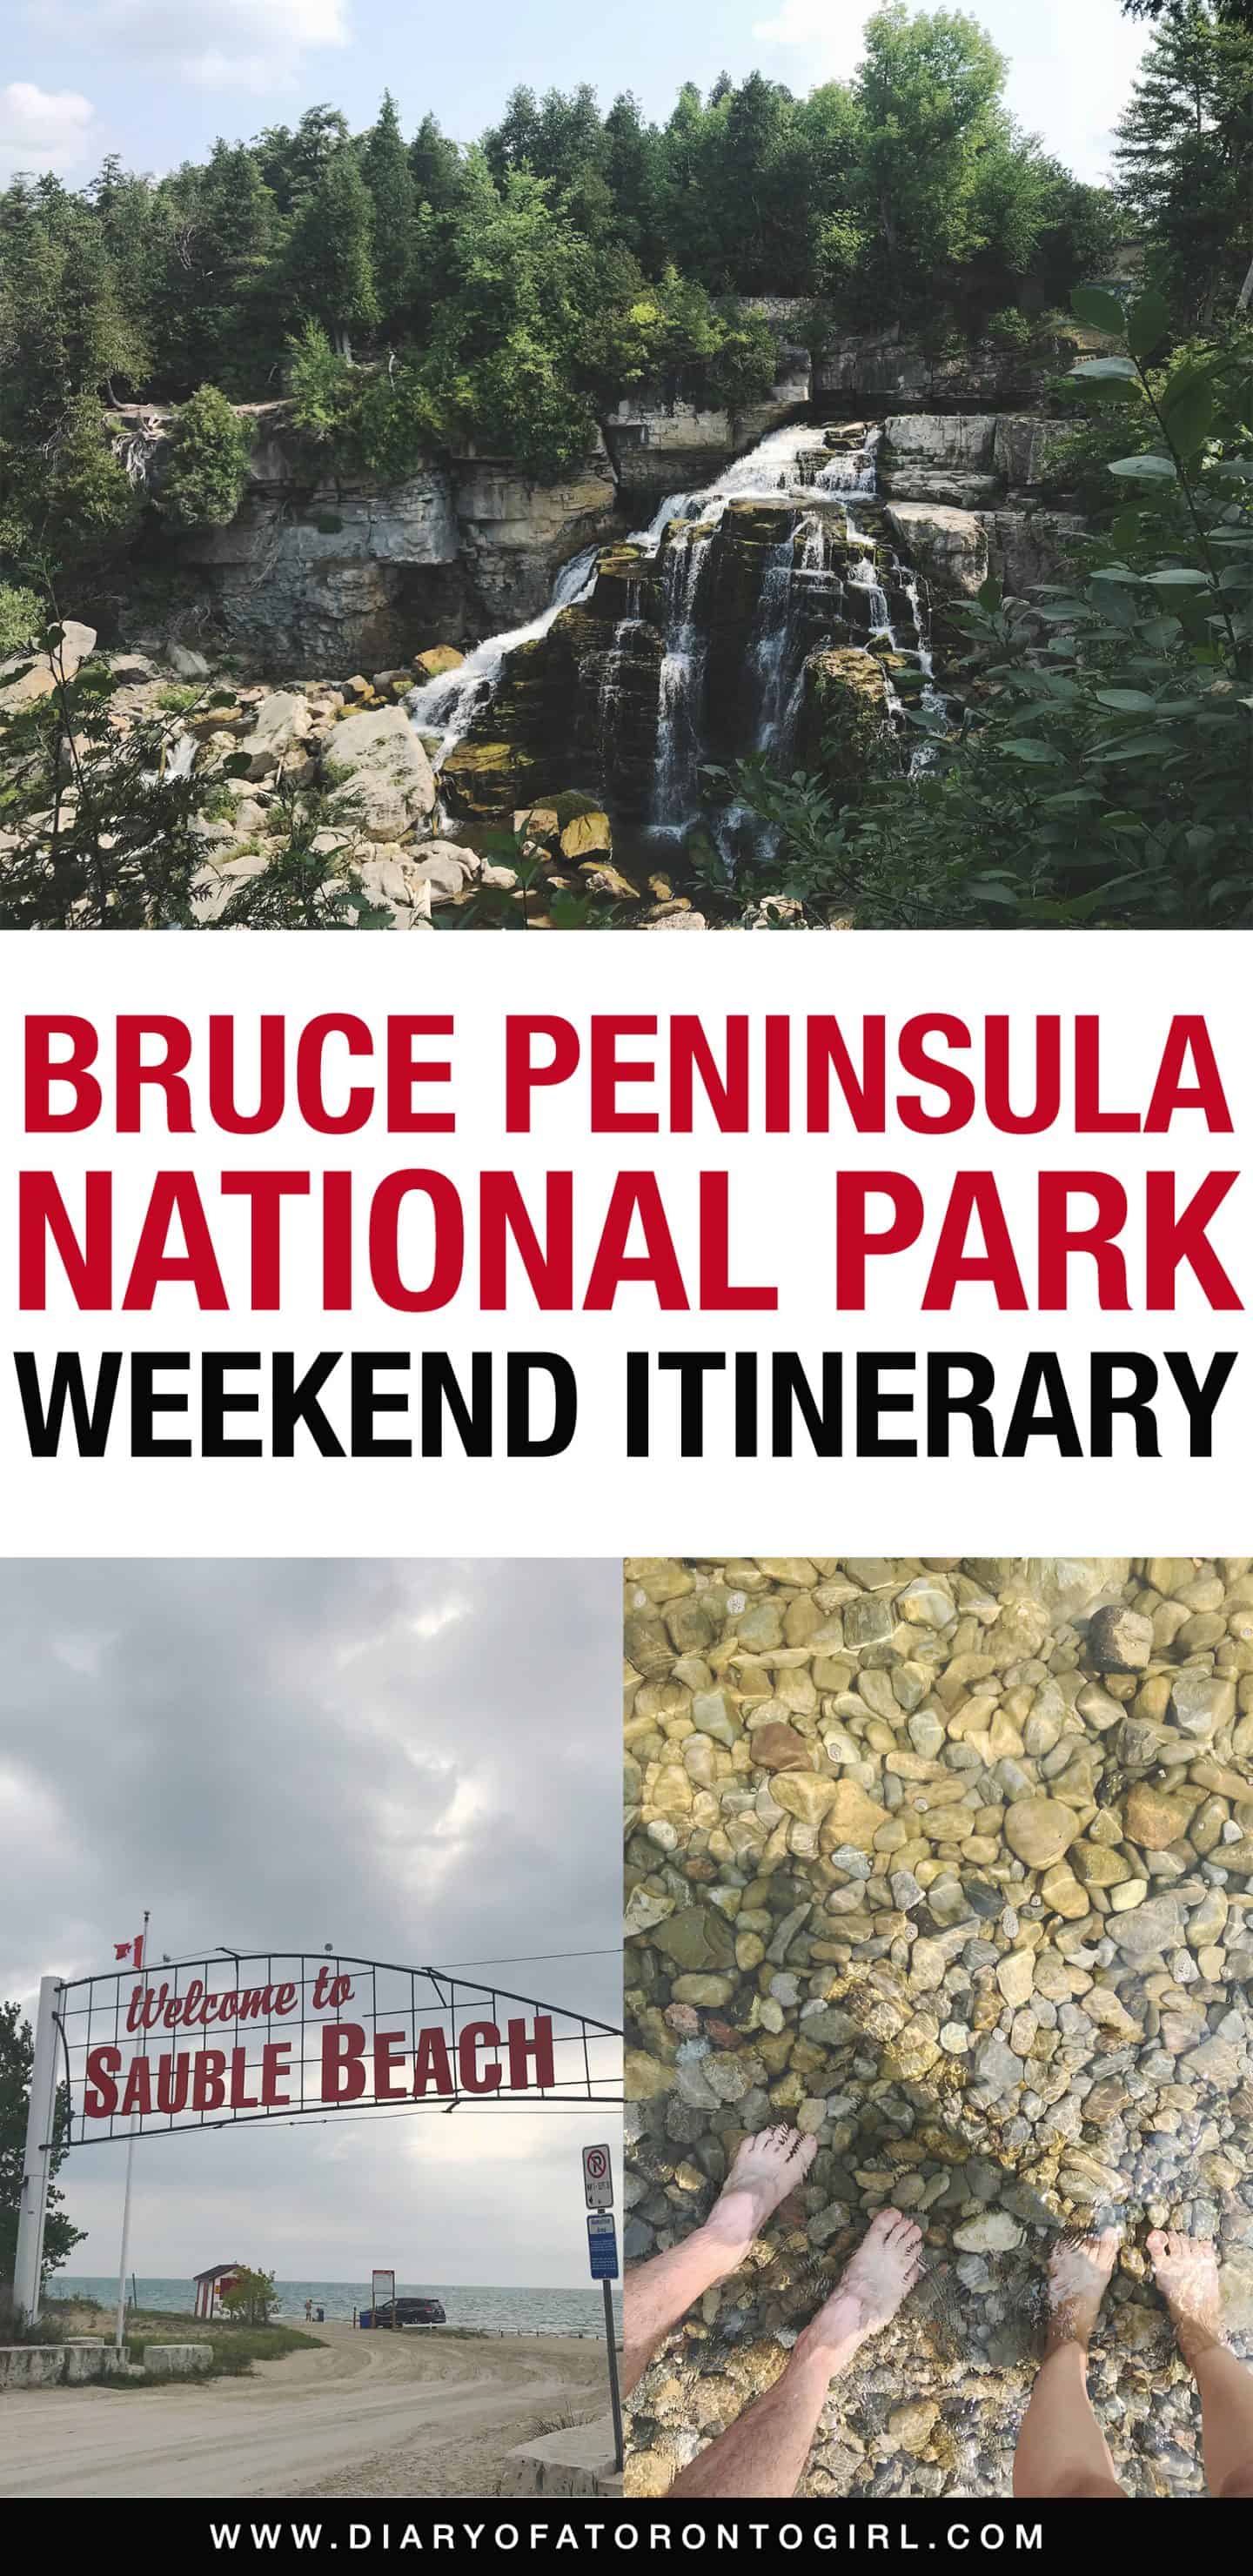 The perfect weekend road trip guide from Toronto to Tobermory and Bruce Peninsula National Park, including cool sights to see and the best things to do during your visit!